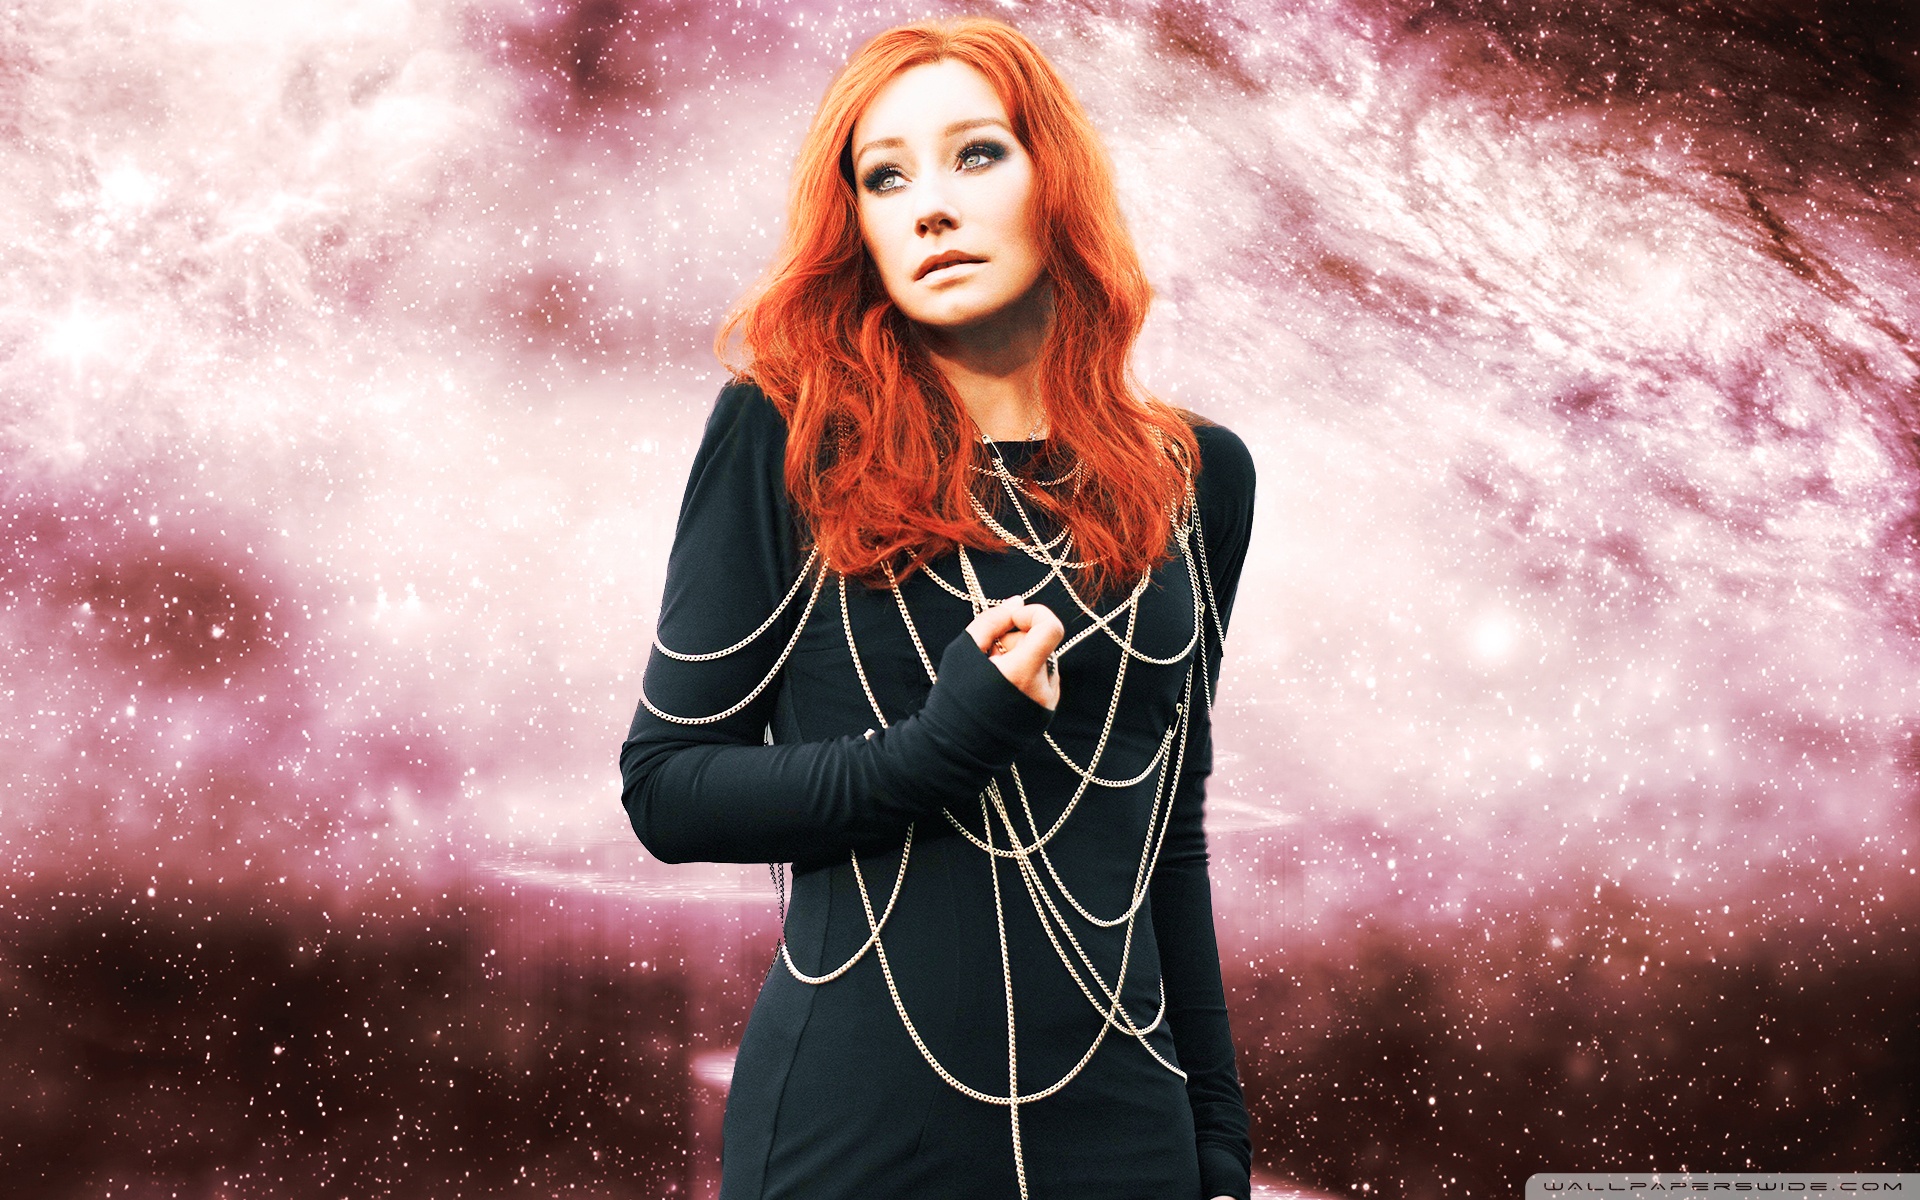 Tori Amos Wallpaper And Background Image